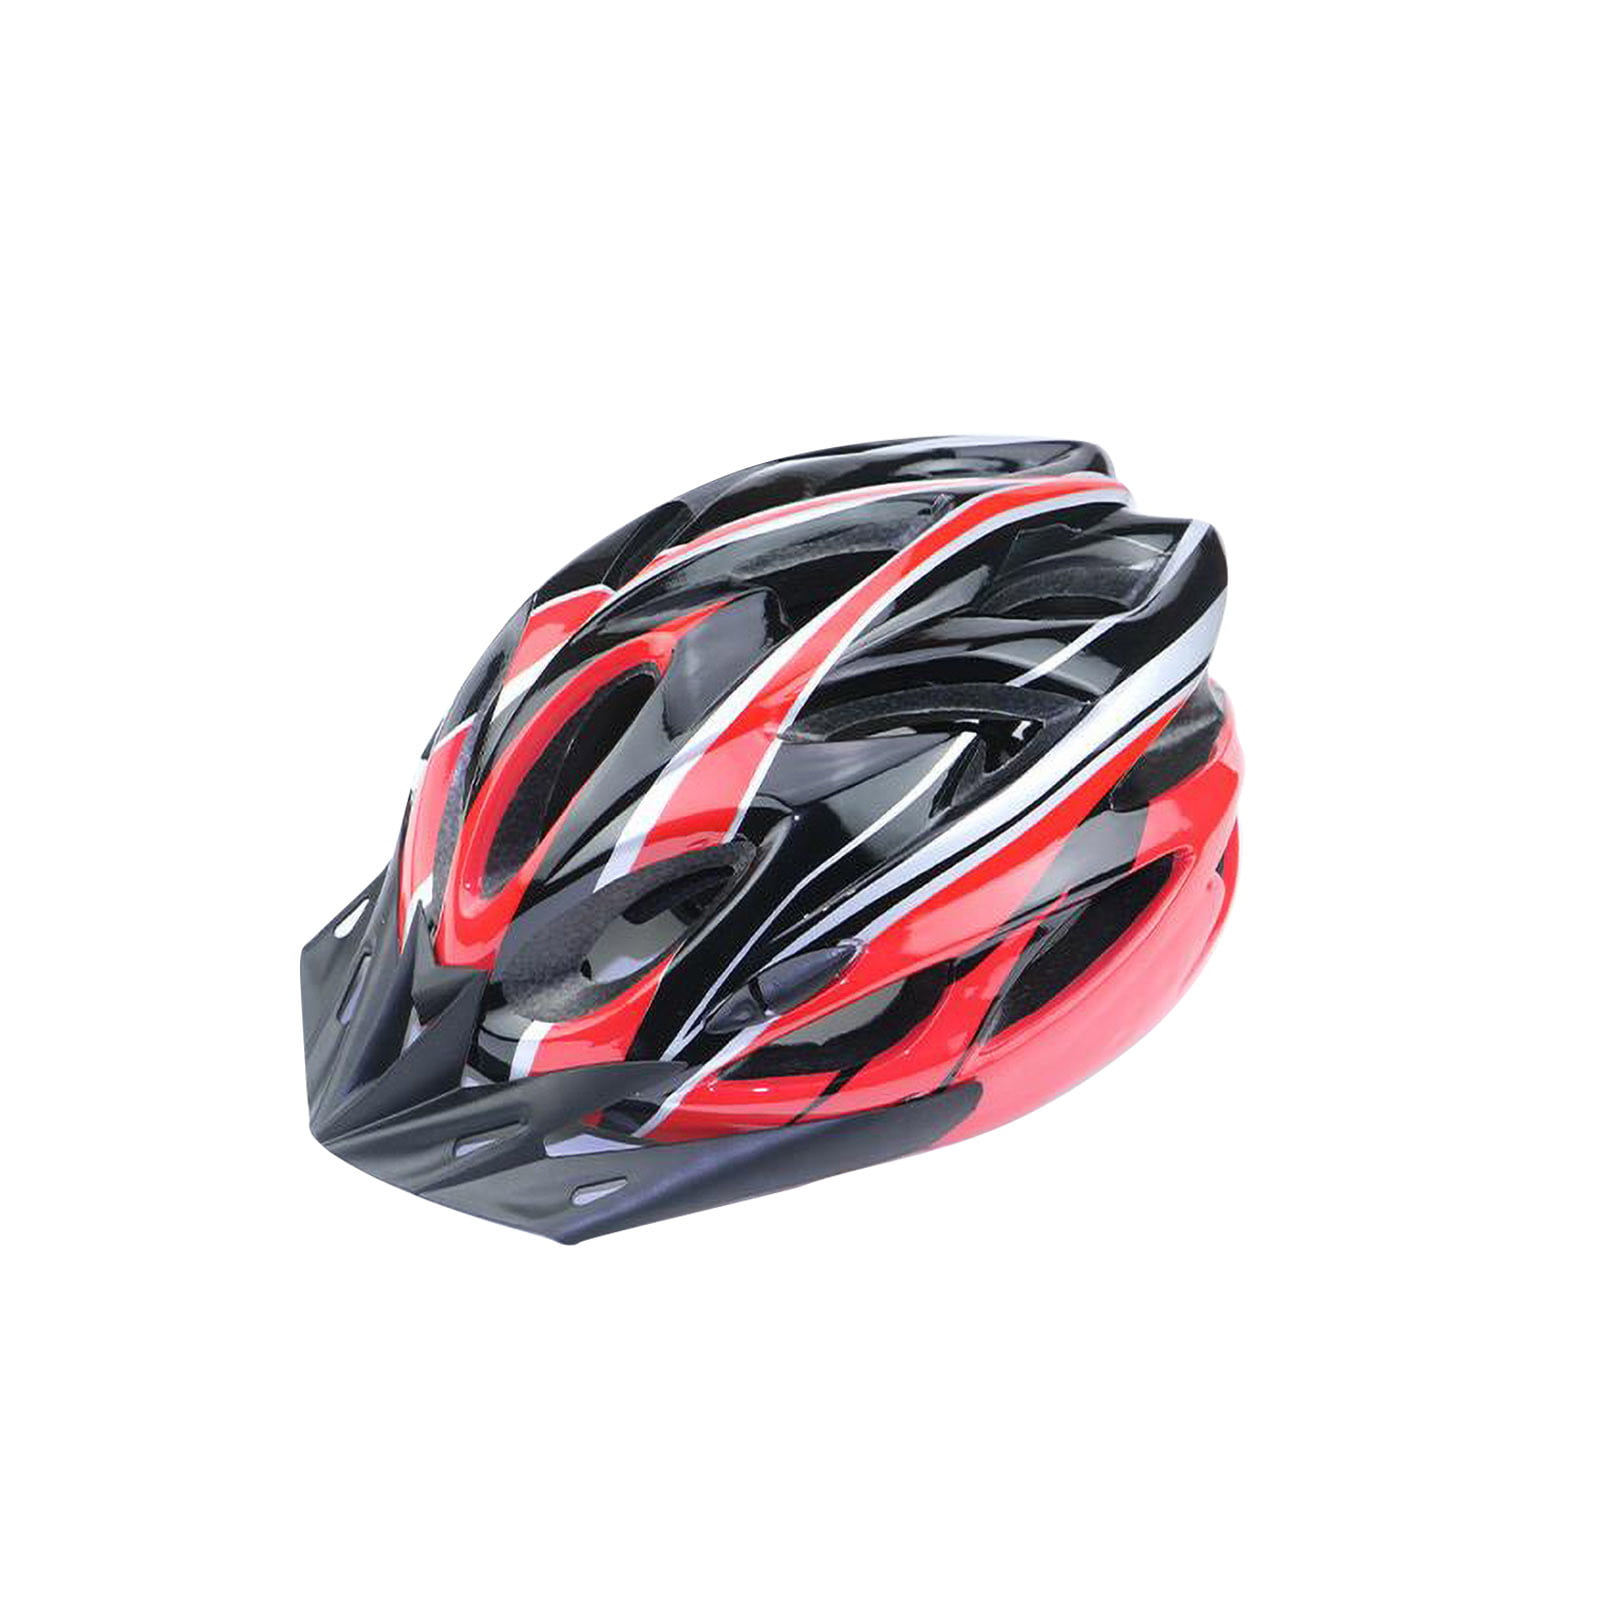 Outdoor Mountain Bike Bicycle Riding Helmet With Tail Light Cycling Protector